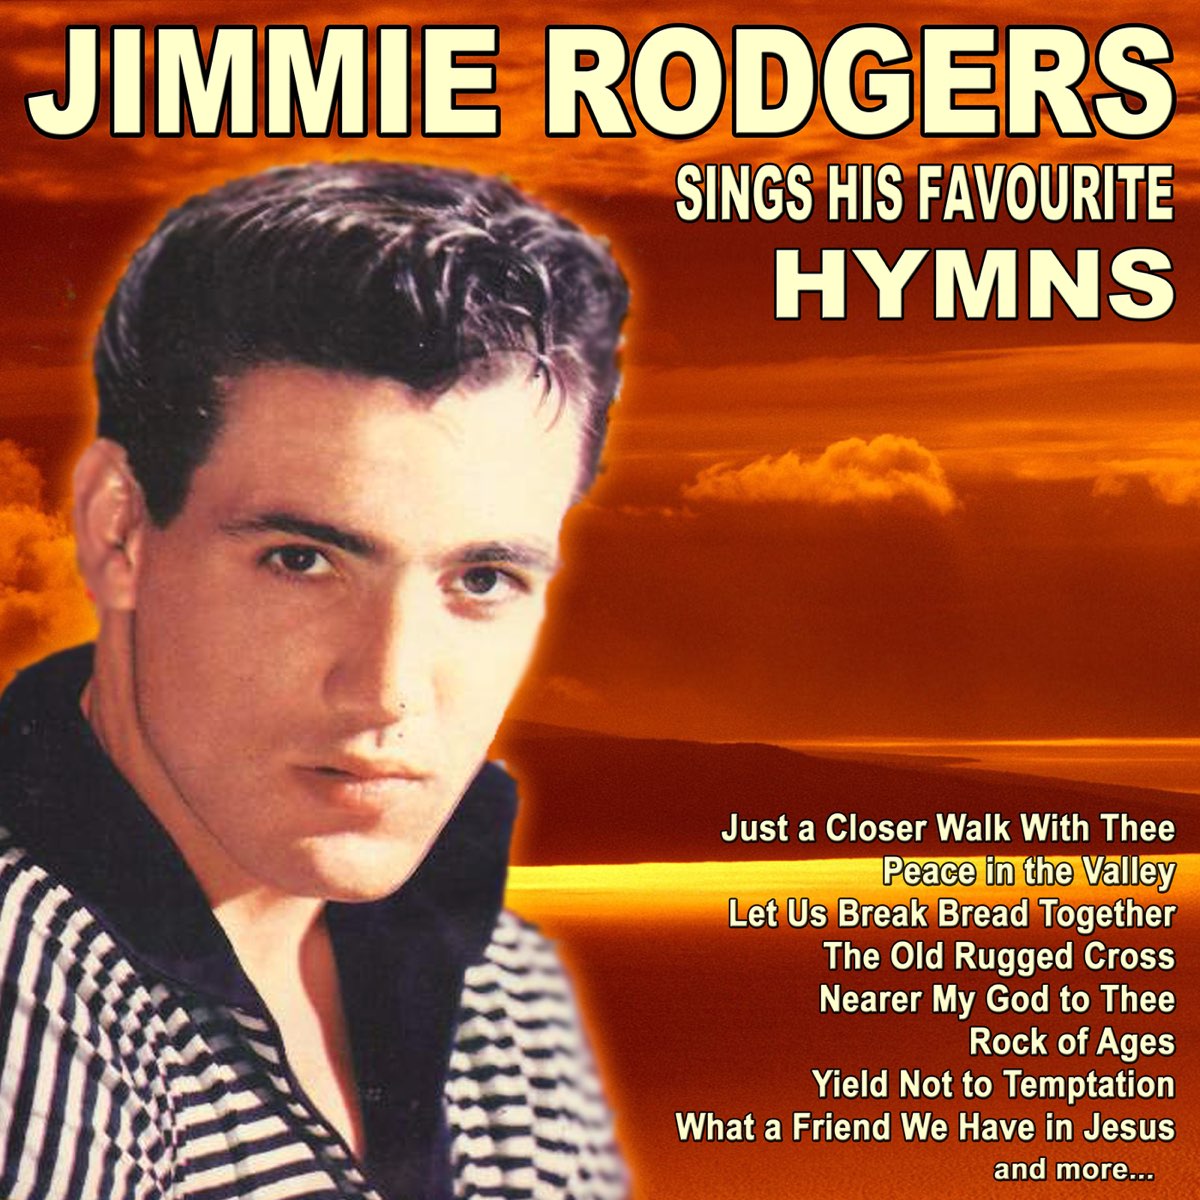 ‎Jimmie Rodgers Sings His Favourite Hymns by Jimmie Rodgers on Apple Music